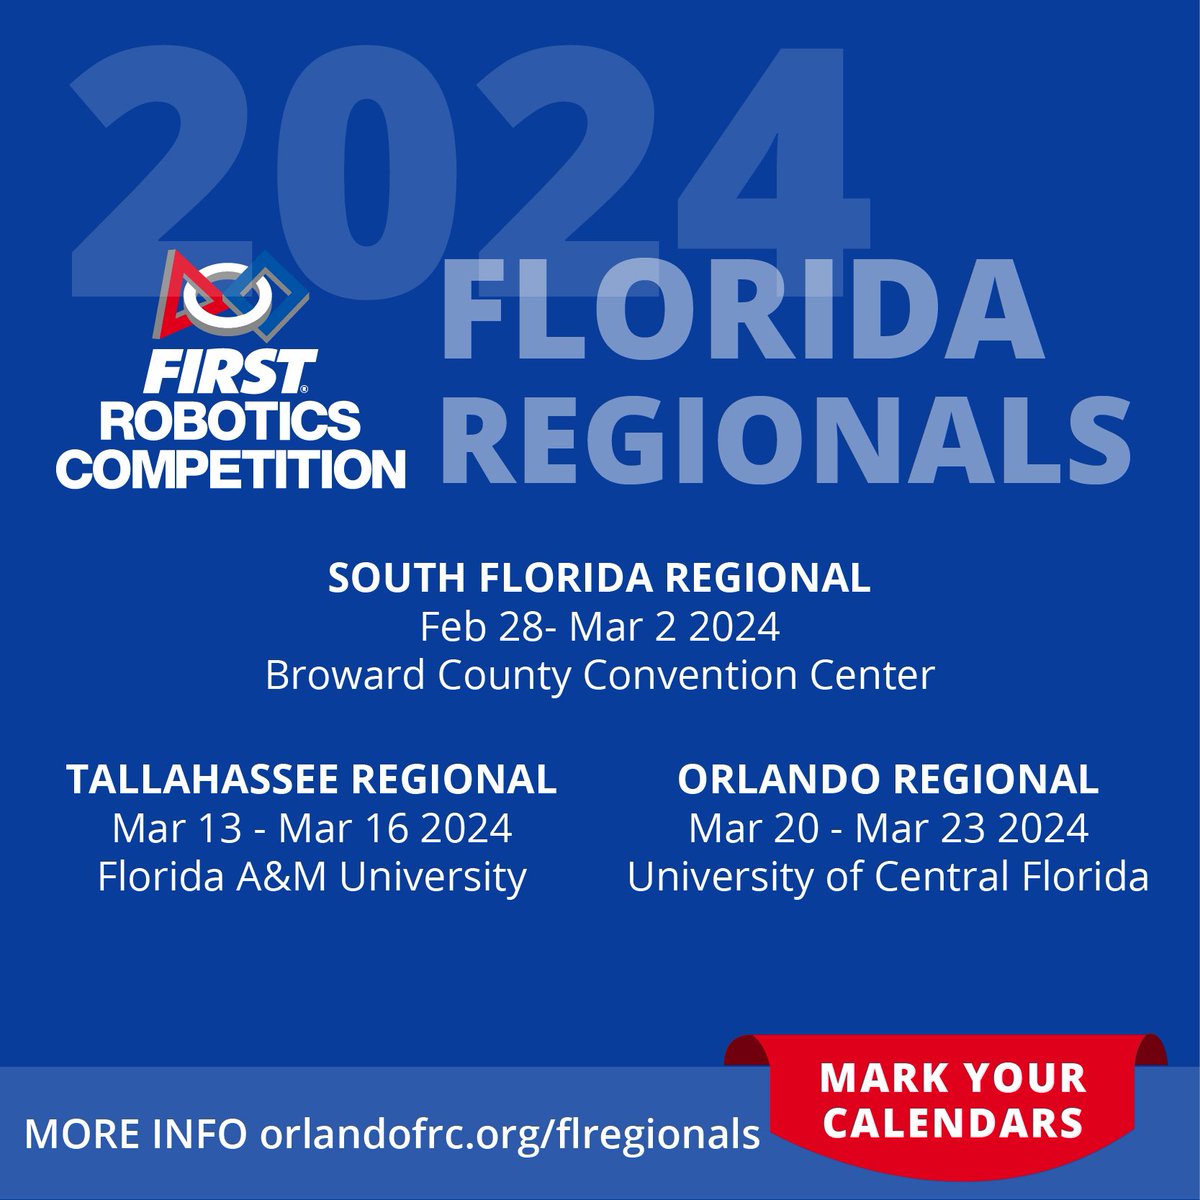 Exciting news for robotics enthusiasts in Florida! Mark your calendars for these three incredible FIRST Robotics Regionals: South Florida Regional: Feb 28 - Mar 2 Tallahassee Regional: Mar 13-16 Orlando Regional: Mar 20-23 #OMGRobots #OrlandoFRC #FIRSTRobotics #FIRSTinFlorida